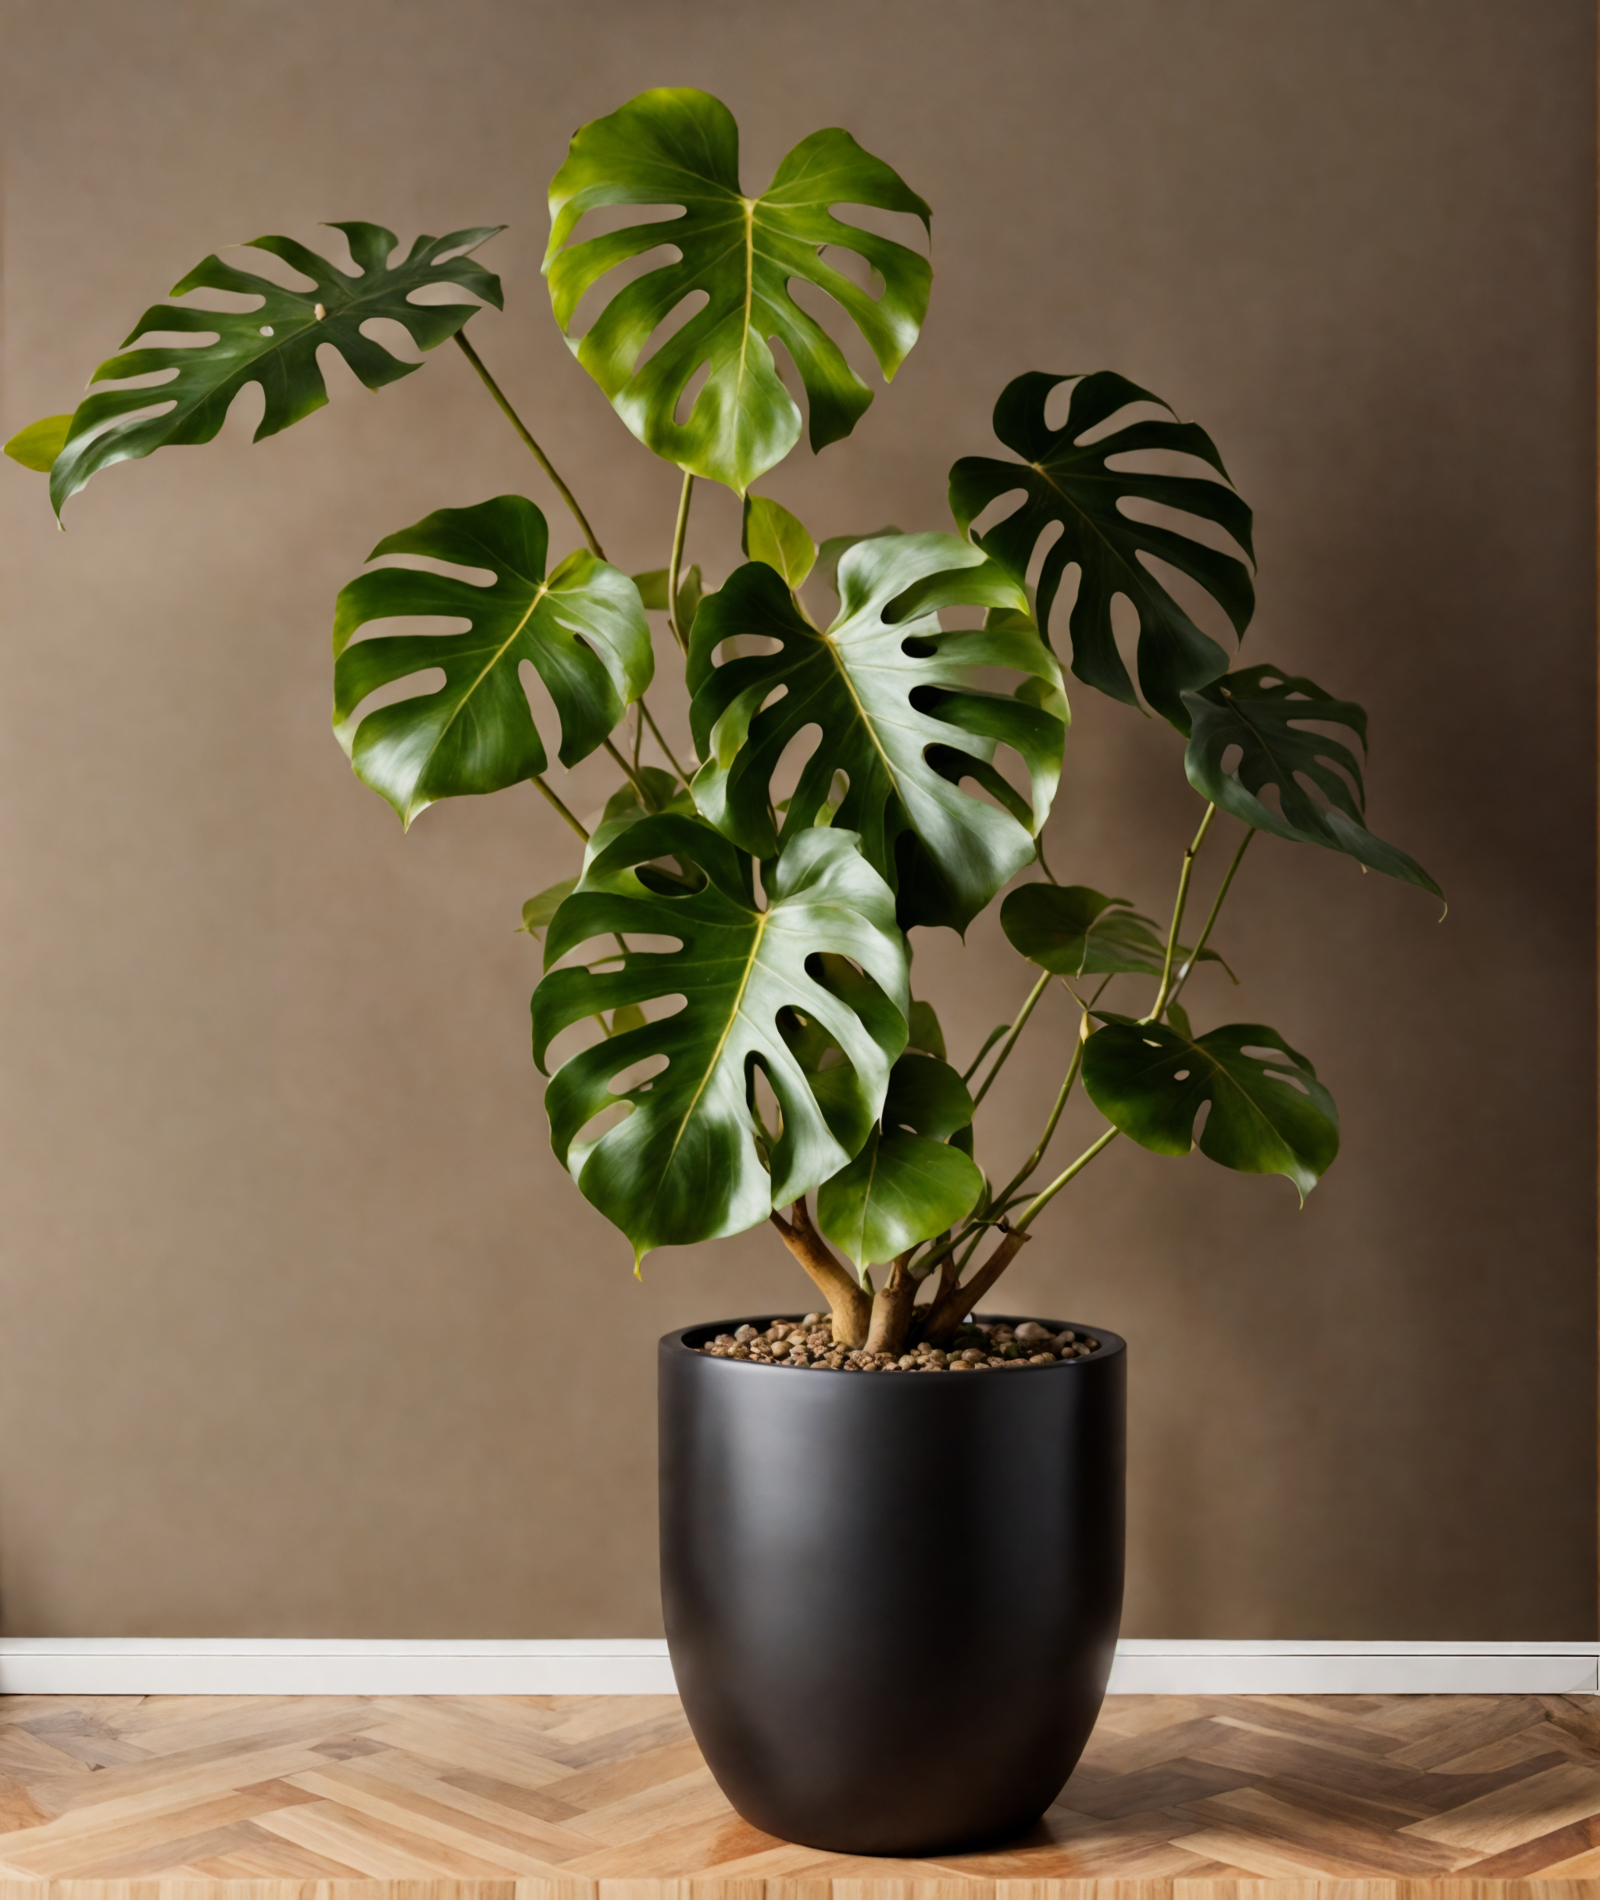 Monstera deliciosa plant with detailed leaves in a planter, set against a dark background indoors.